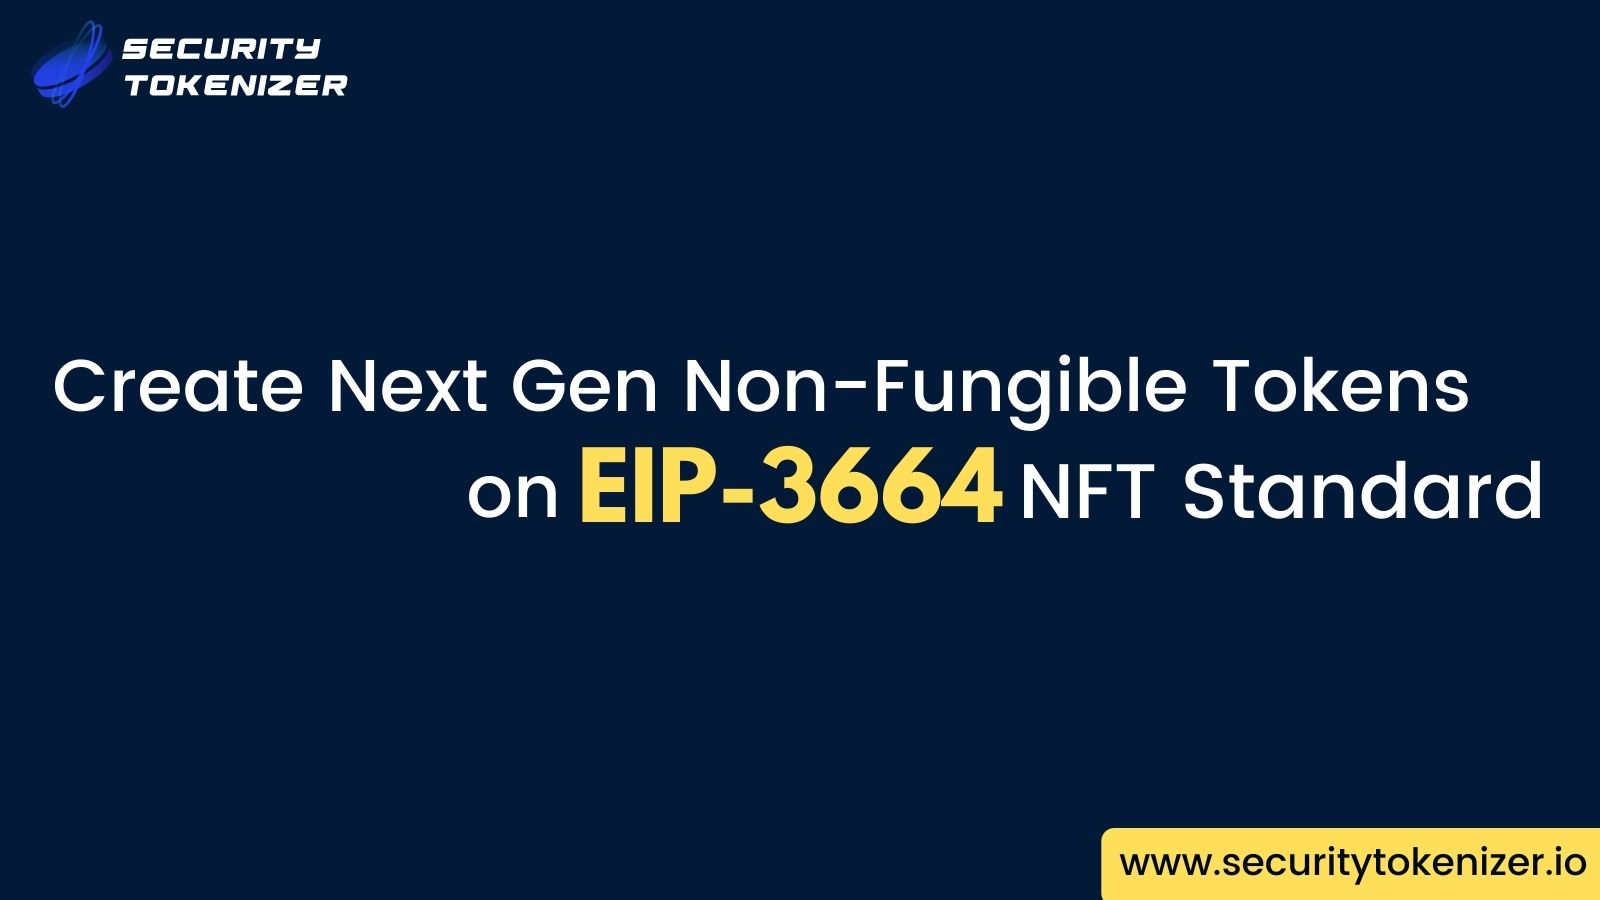 EIP-3664: A New NFT Standard To Create Next-Gen Non-Fungible Tokens